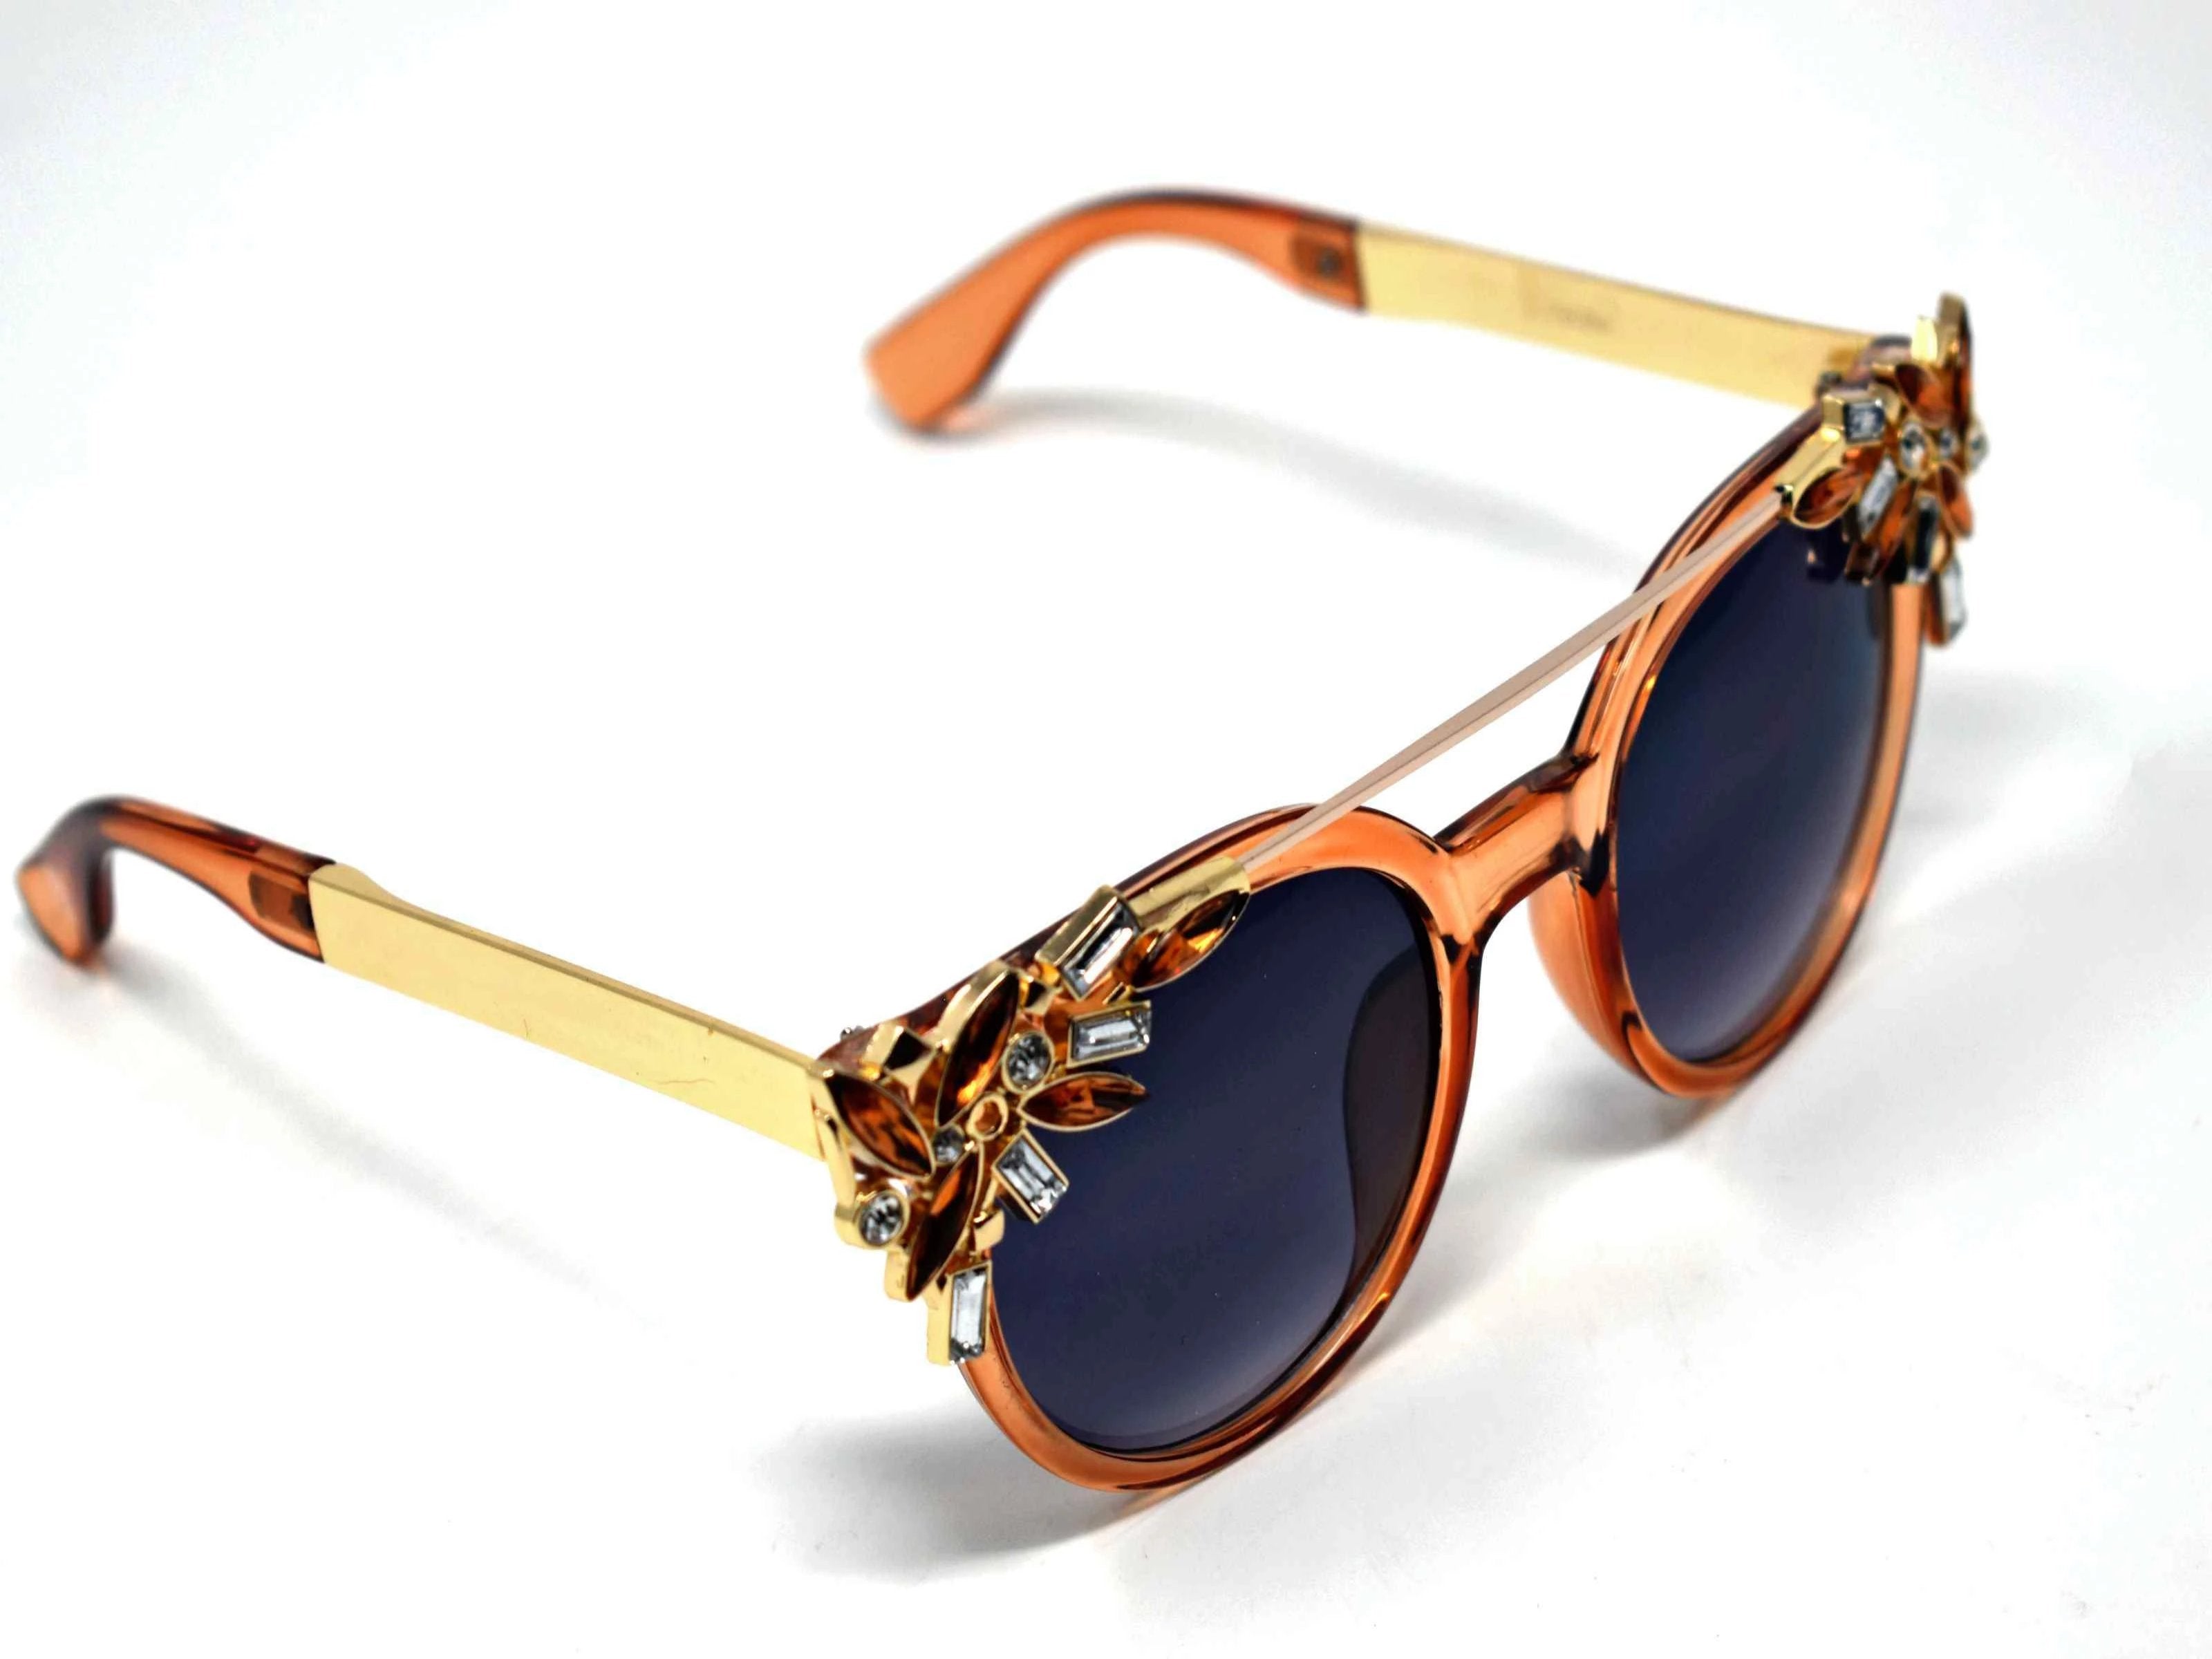 Trend setter and attention getter is what they will call you in these Pansy brown sunglasses with a sleek gold trim adorned in brown and clear gems, in a pantos style frame.